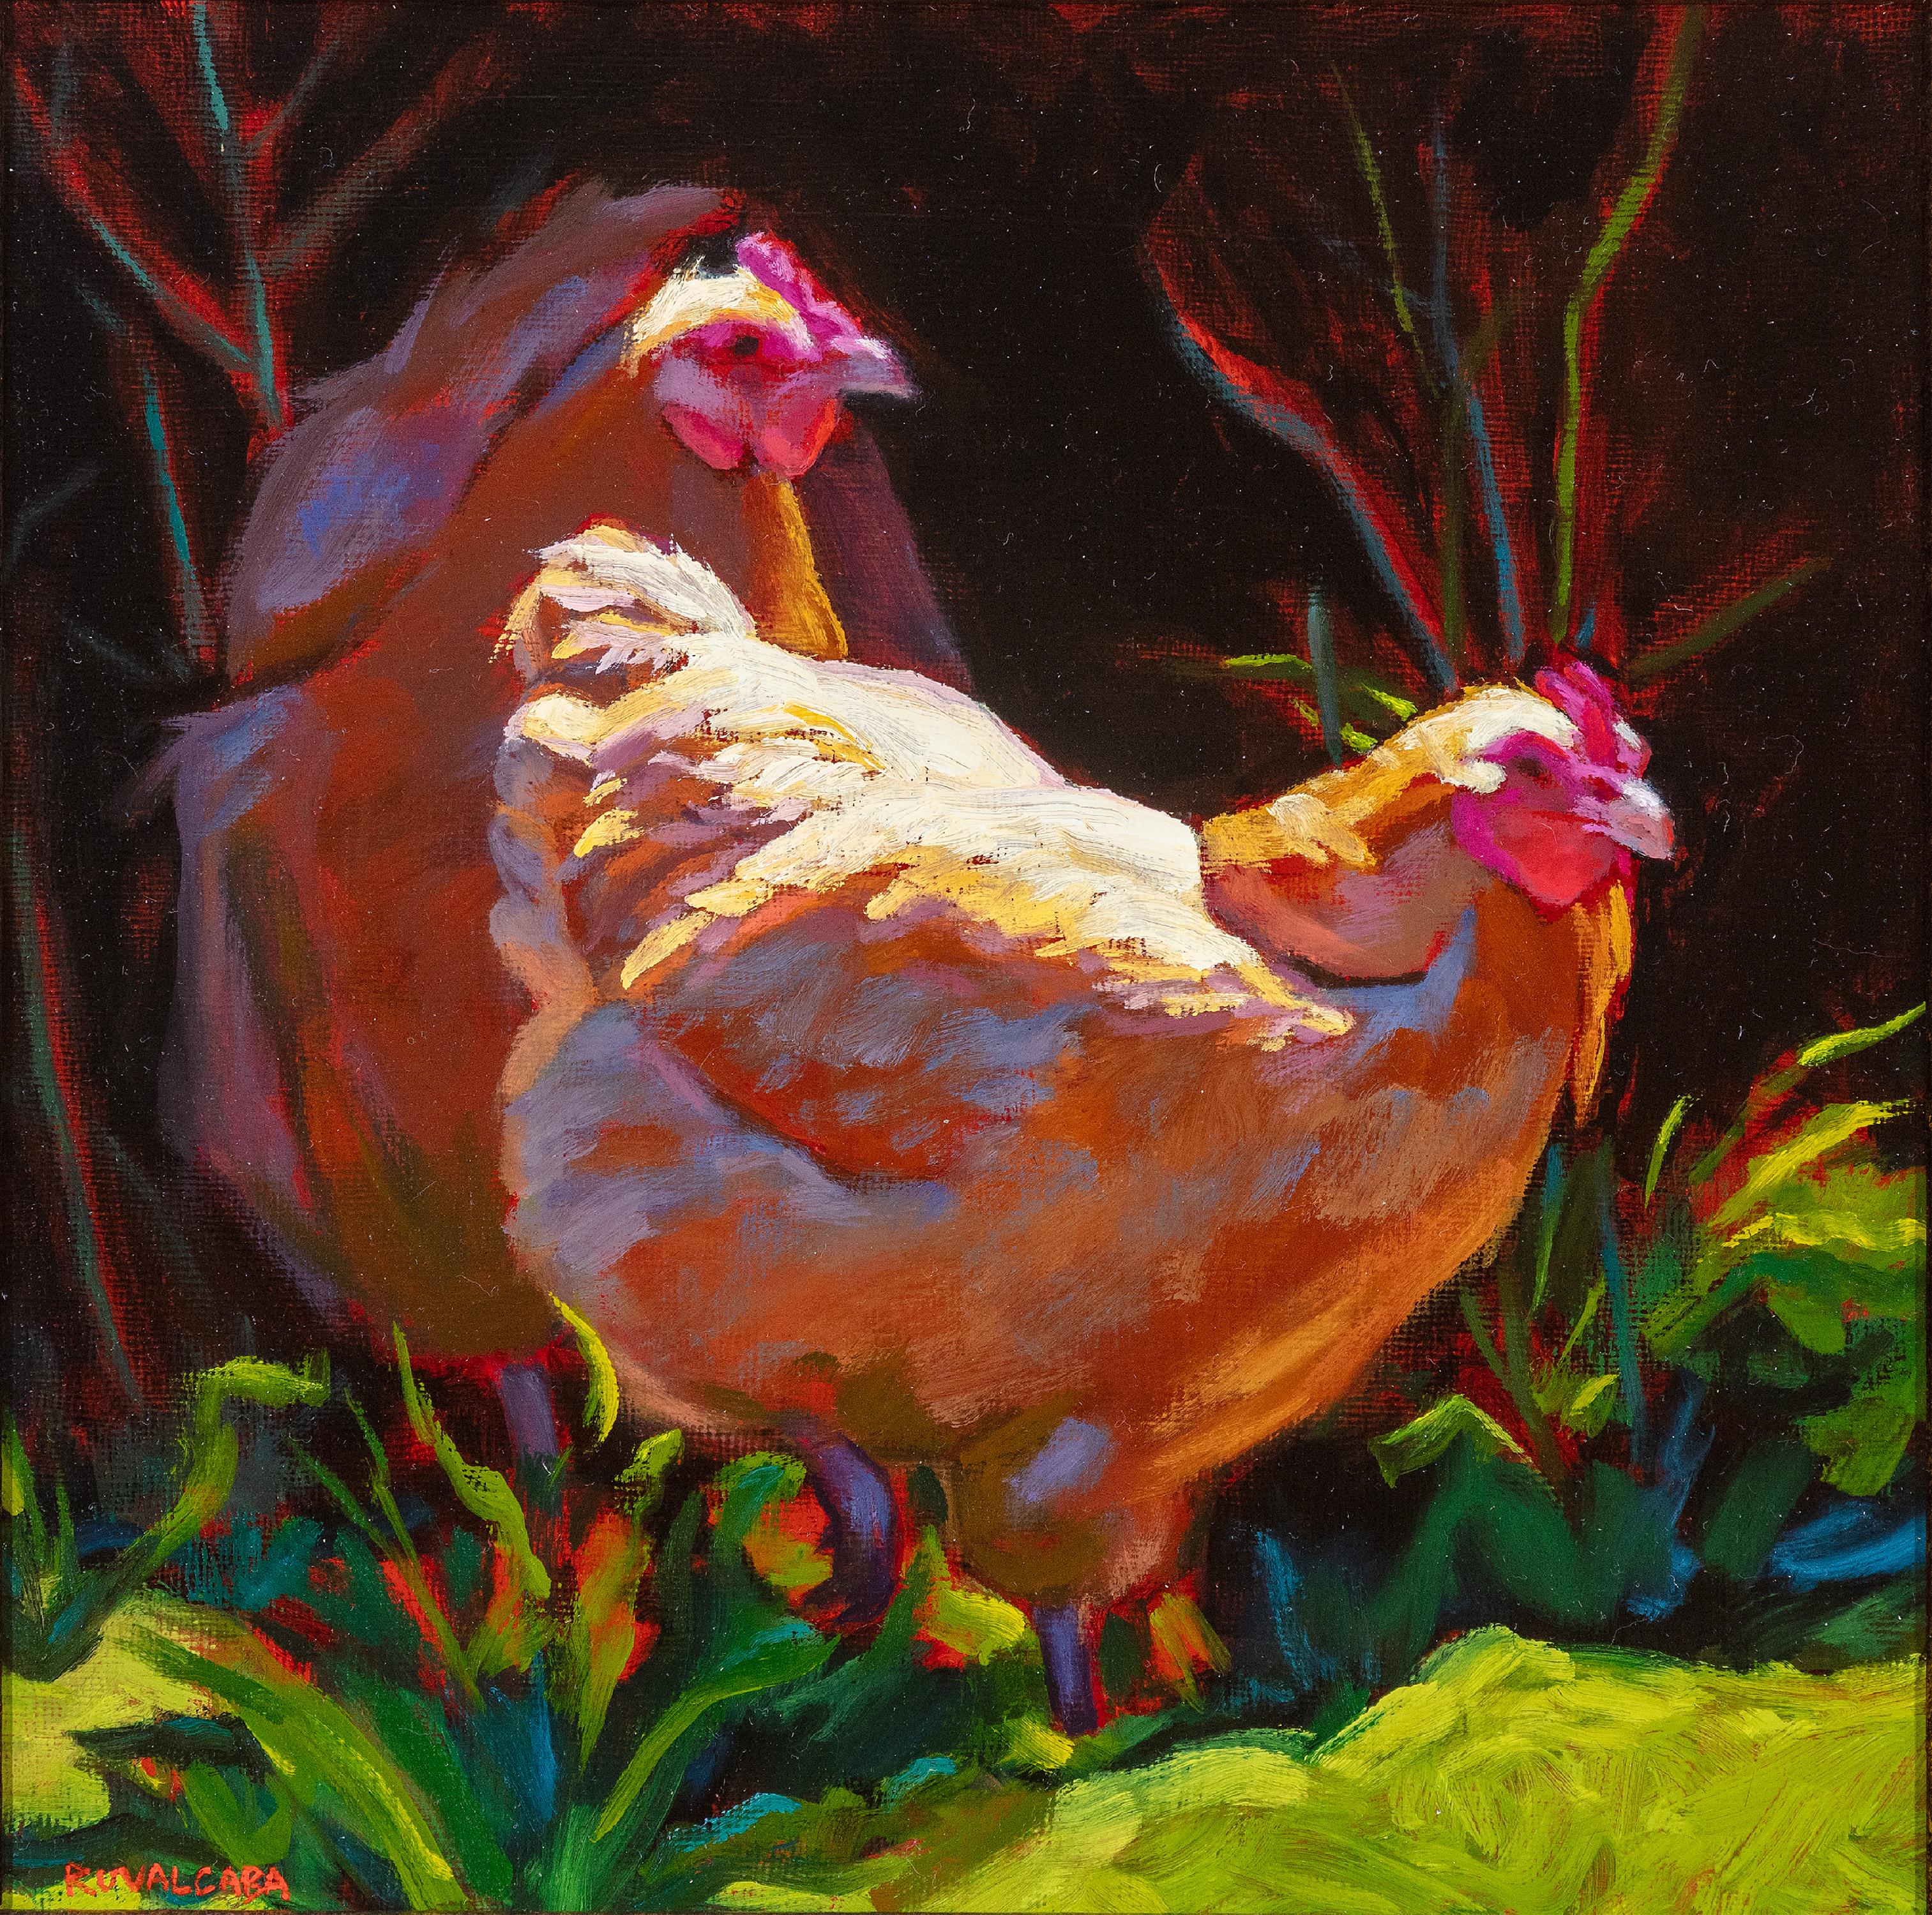 Wisconsin artist, Cathryn Ruvalcaba creates images of classic midwestern farm scenes by zooming in on the animals that populate these fields. Her use of oil paint on gesso board offers a realist lens of these subjects. While her style nears photo